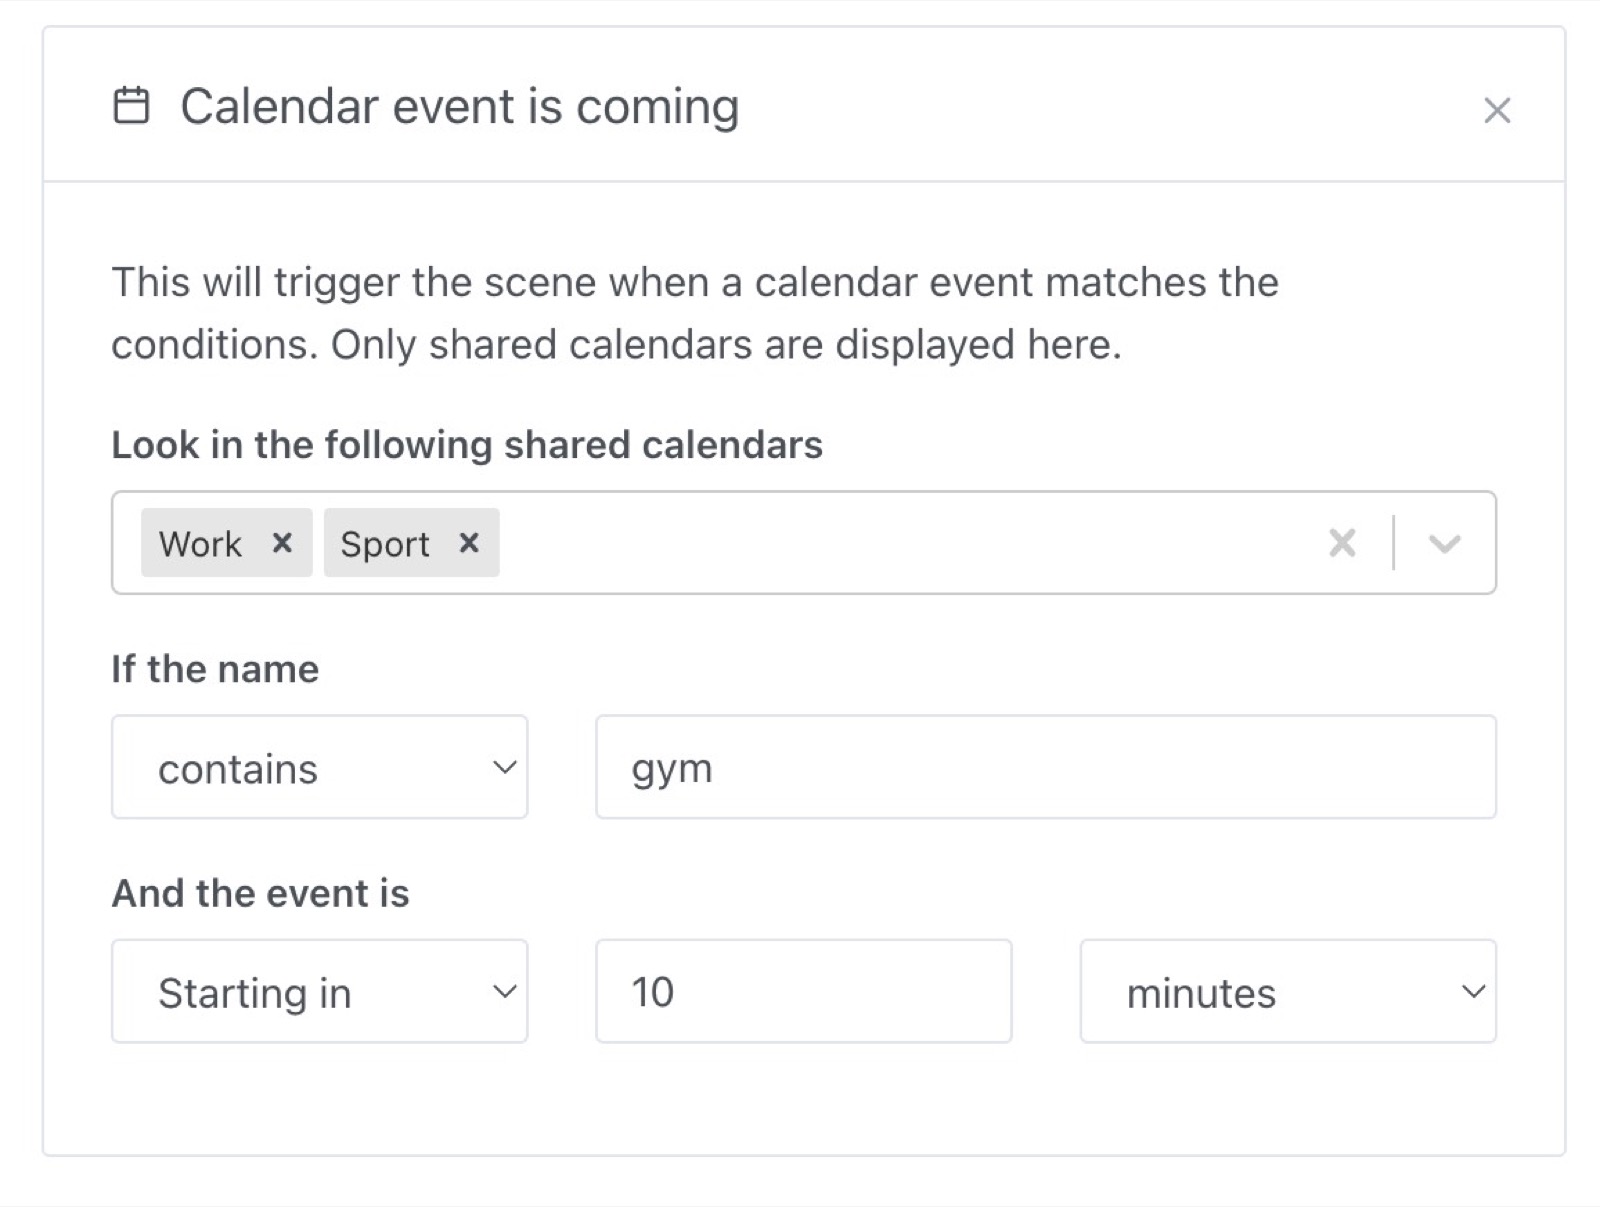 Calendar event is coming